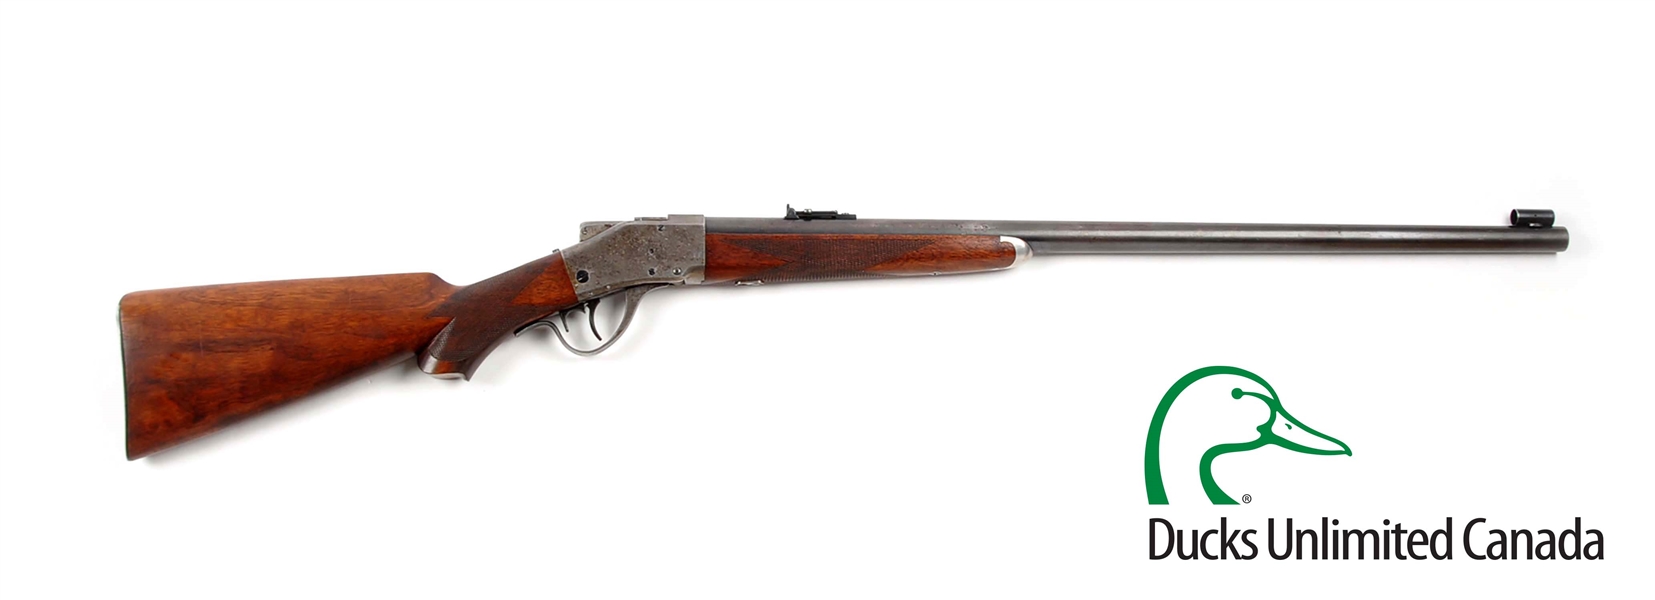 (A) J.P. LOWER MARKED SHARPS 1878 BUSINESS SPORTING RIFLE.